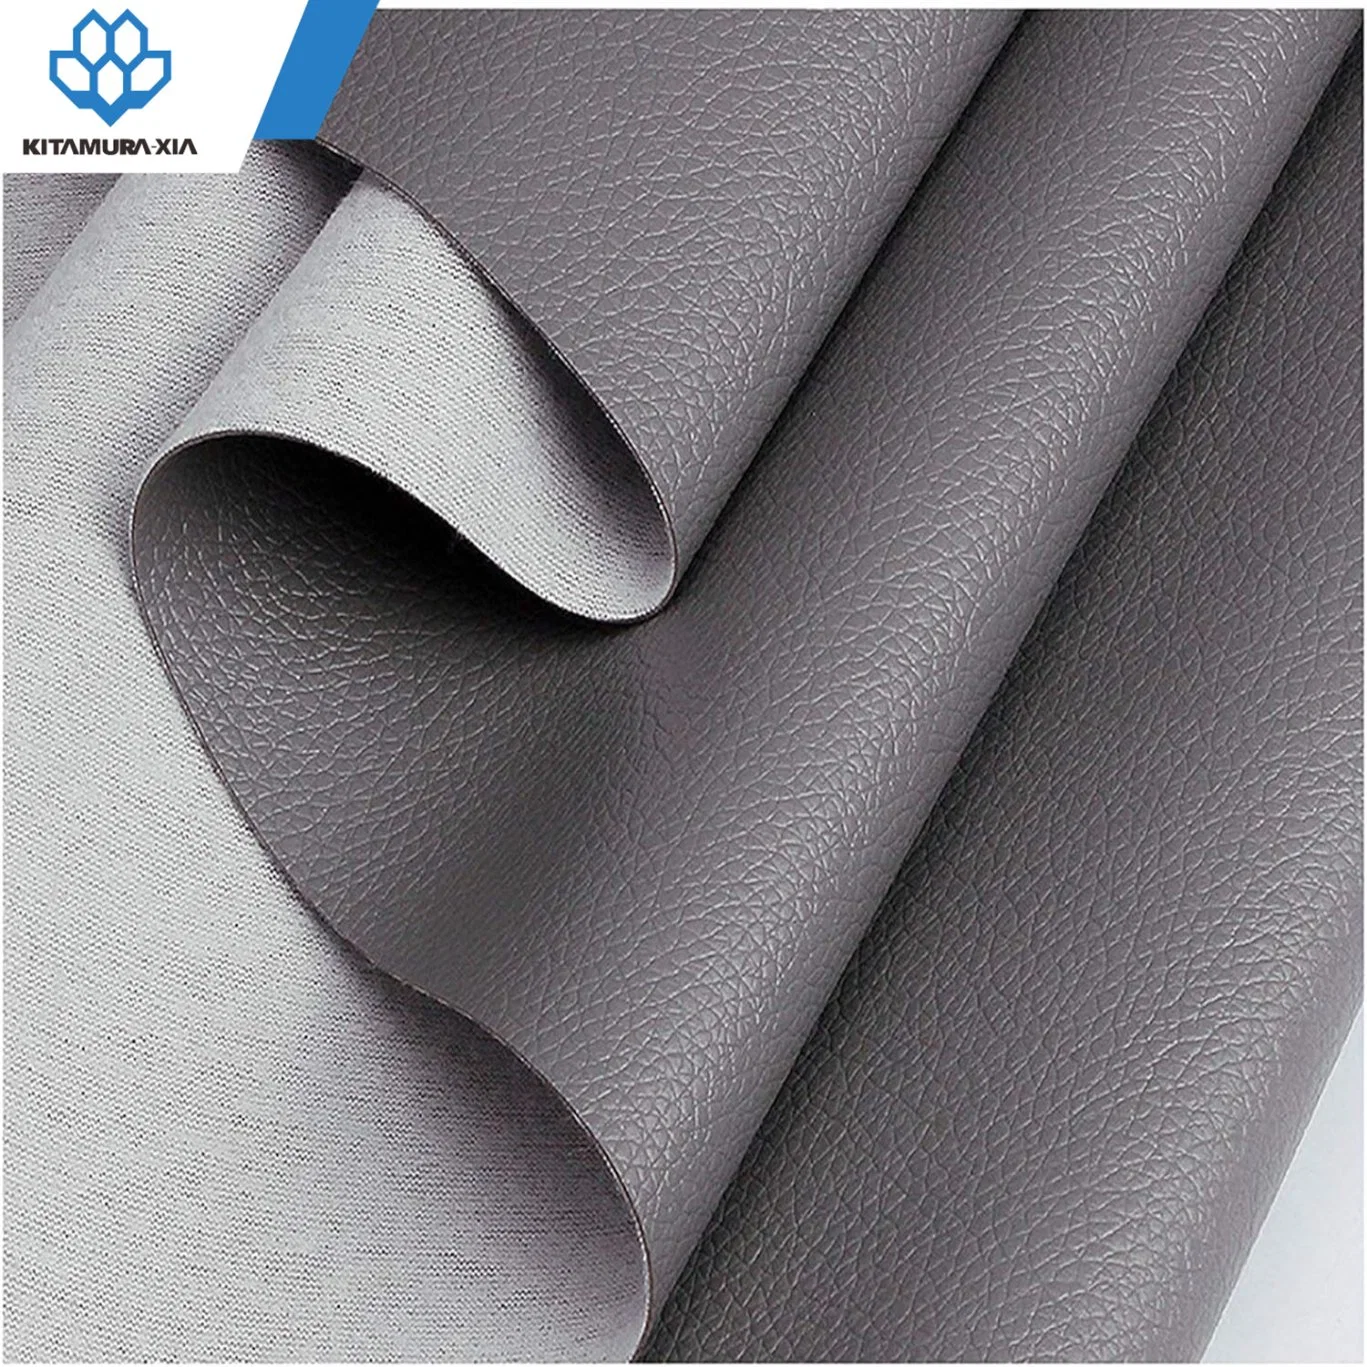 Synthetic Leather Fabric PU Faux Stretch Material for Car Seats Sofa